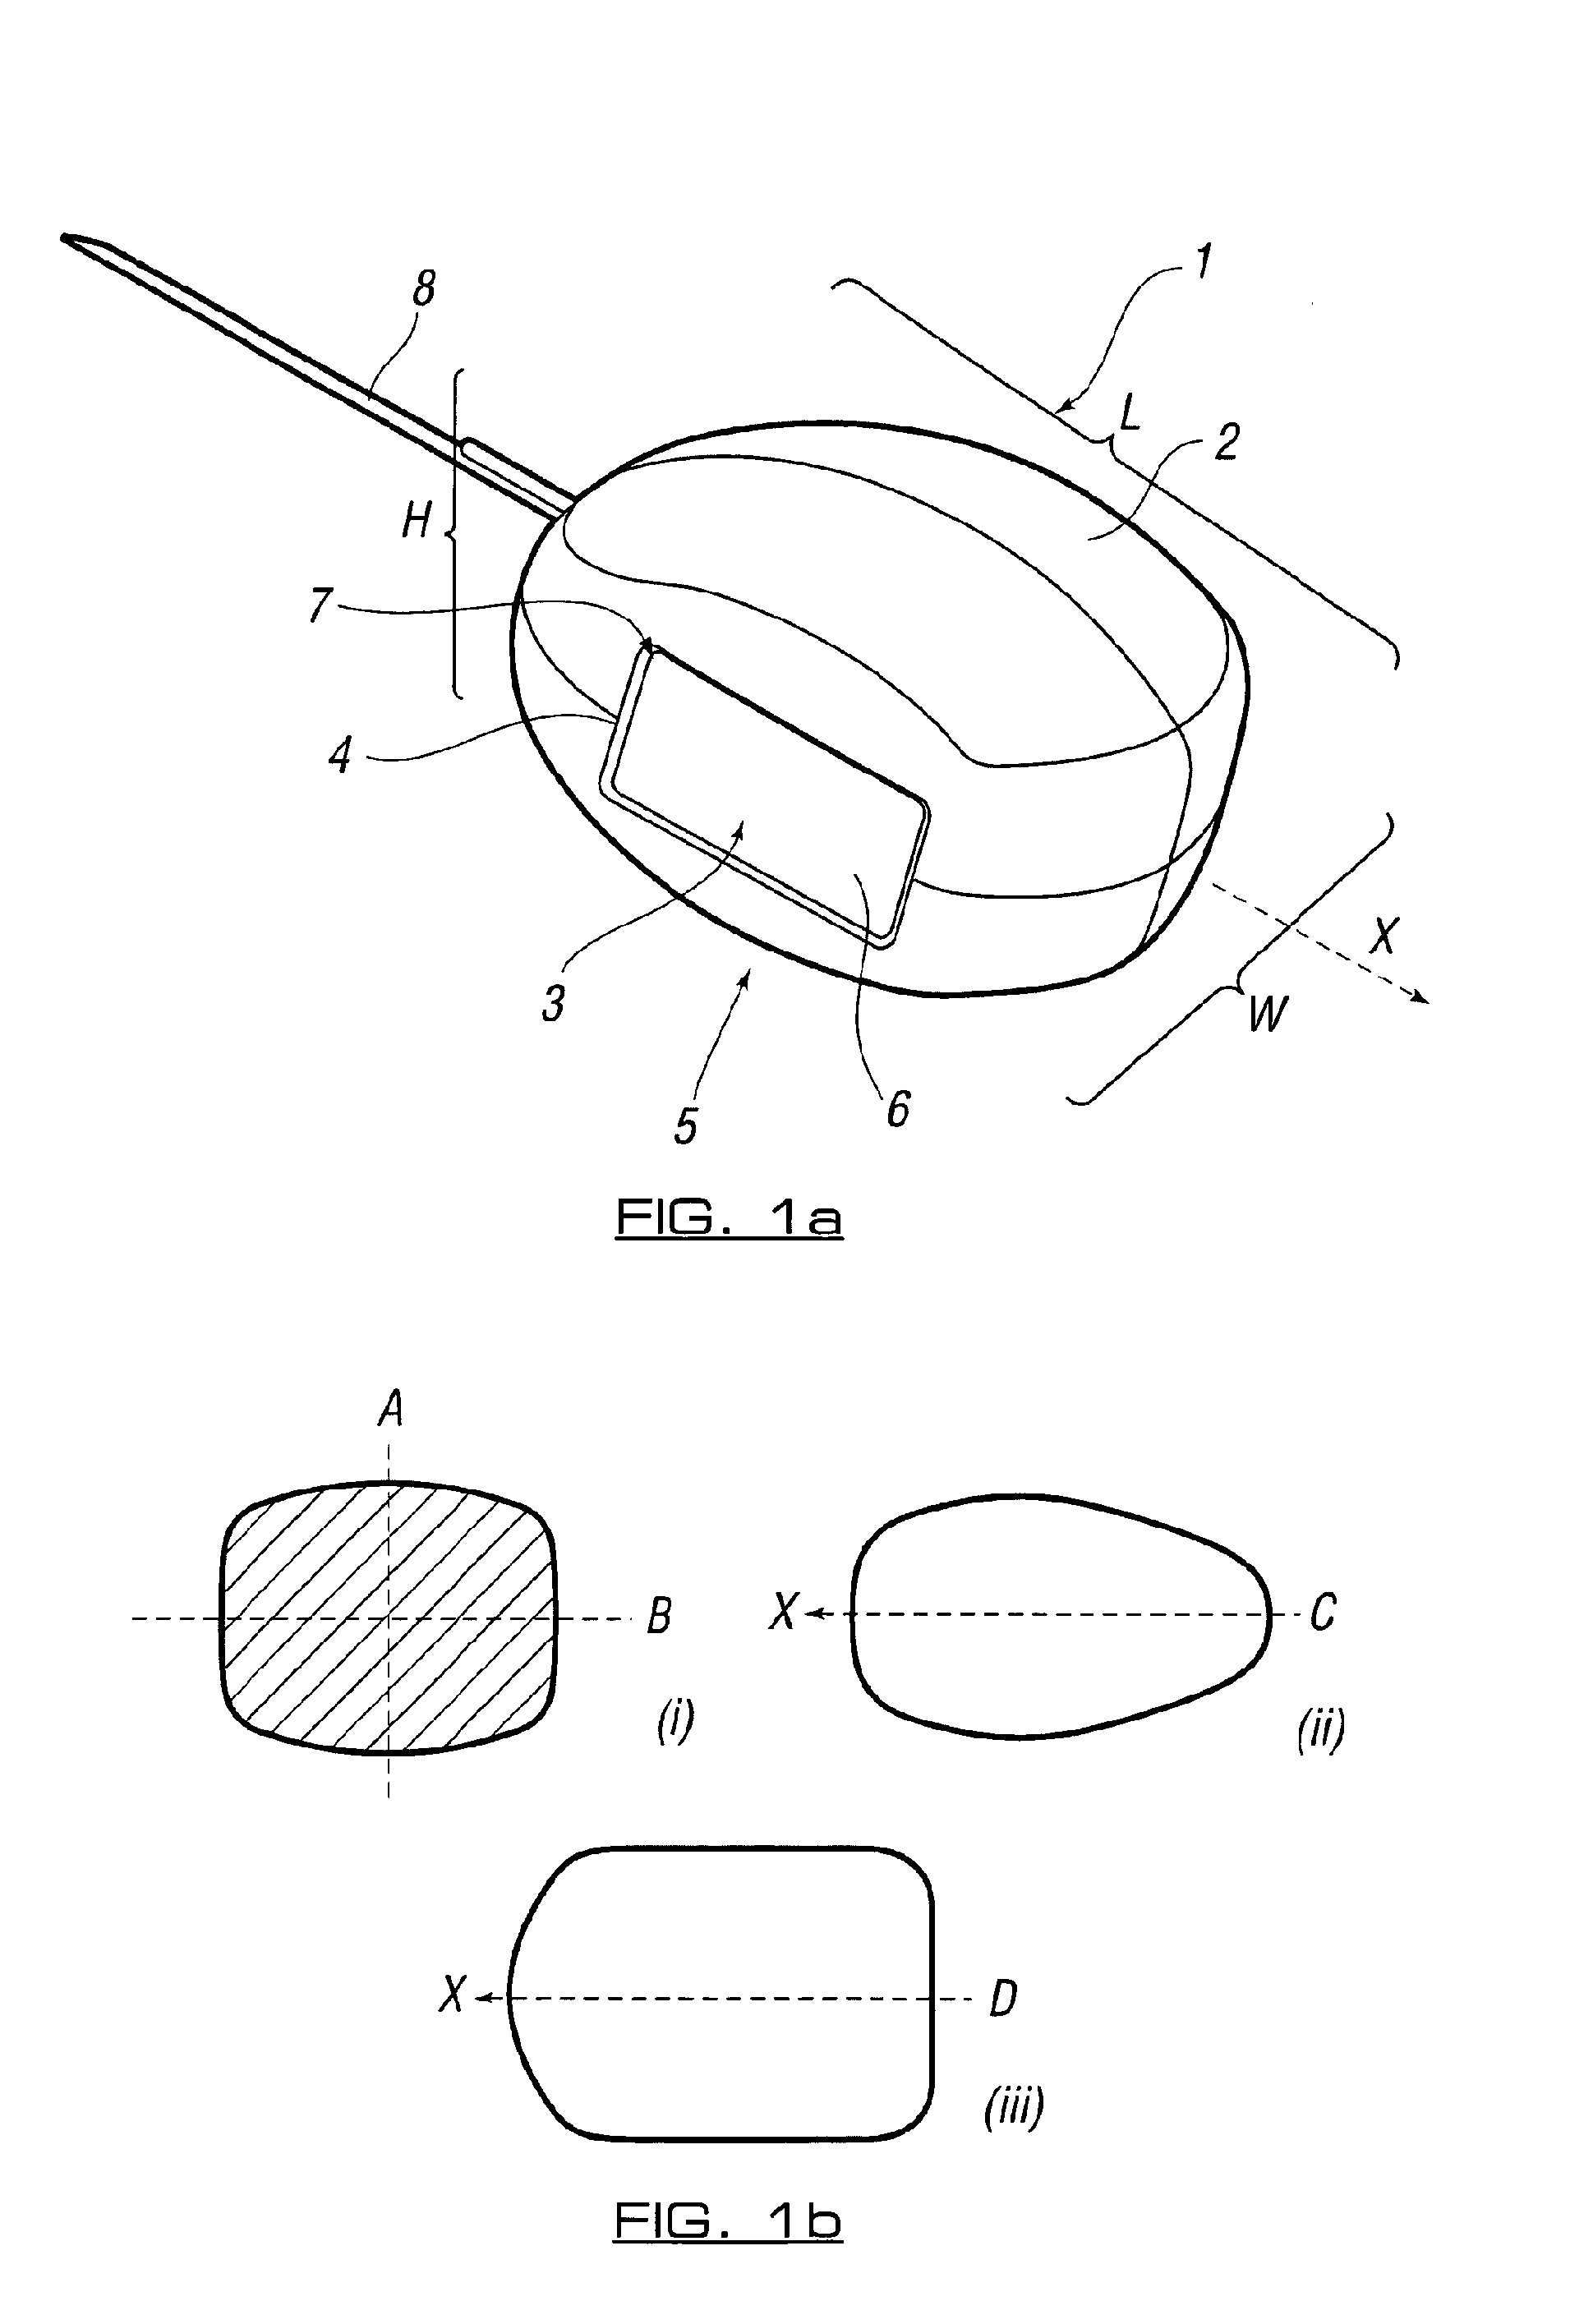 Compressible device